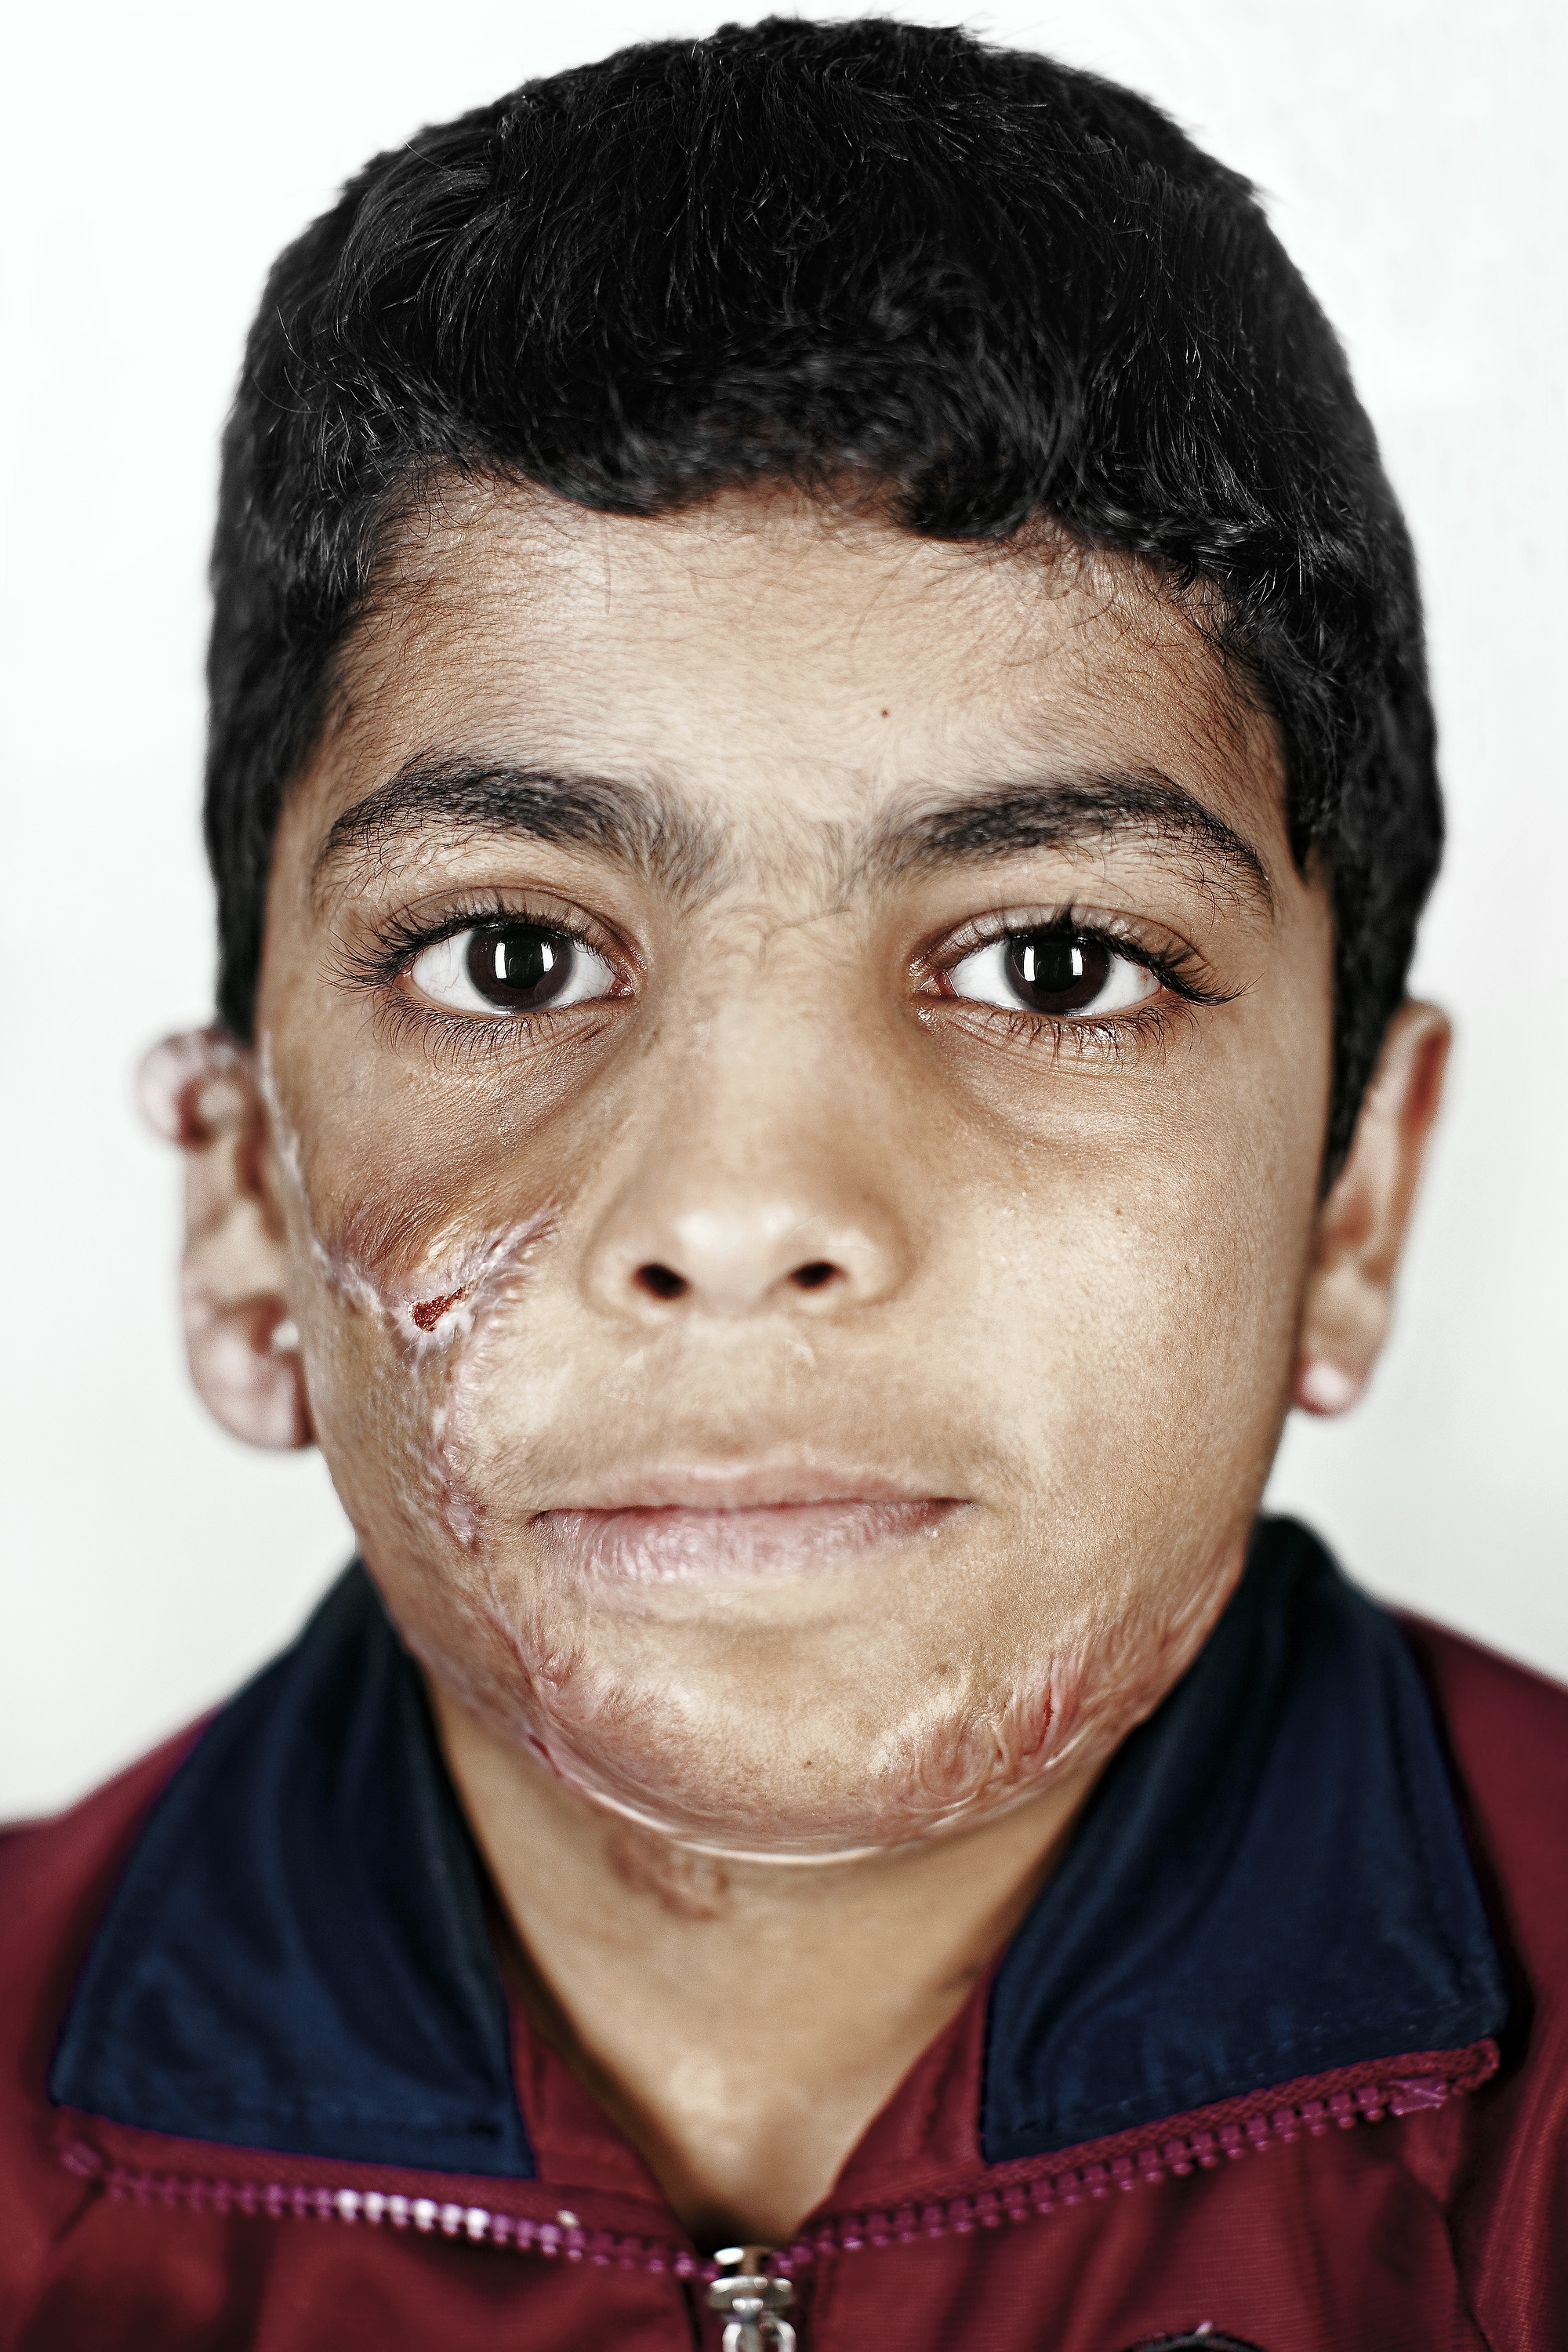  Hussein Talib, from Mosul, is nine years old. He has been in Amman for a year and three months. A bomb went off when he was inside his home, killing his mother and leaving him with severe wounds.&nbsp; 